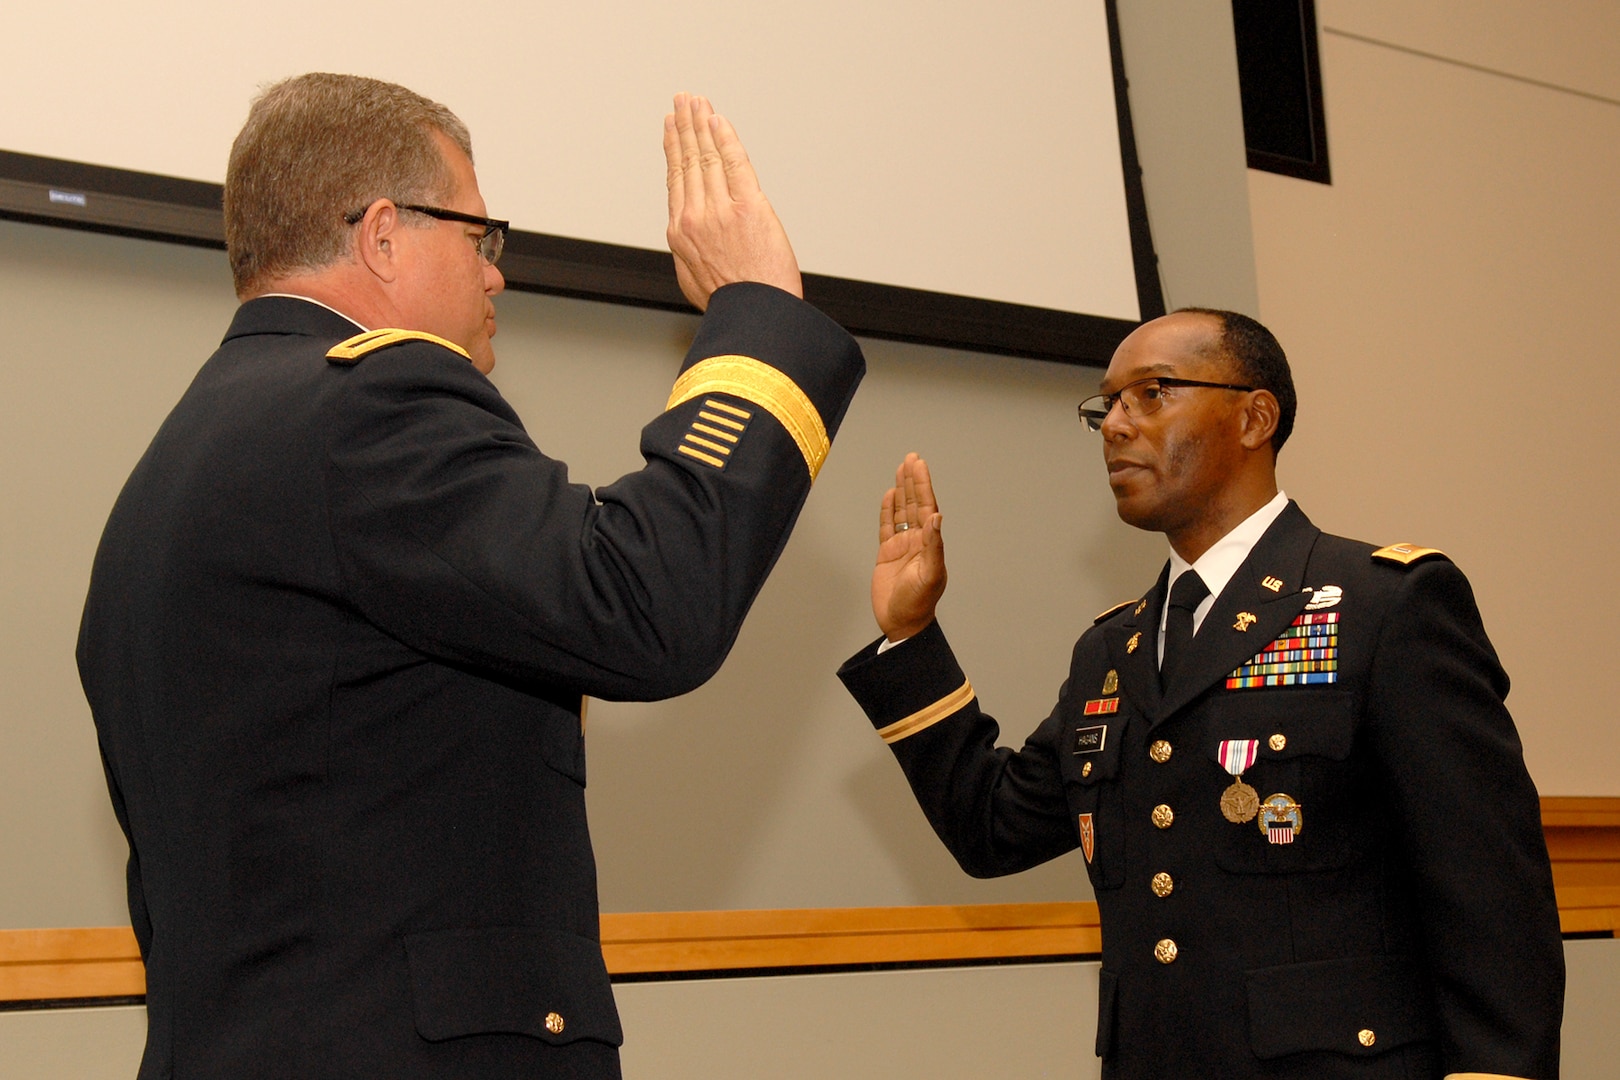 DLA Troop Support Commander Army Brig. Gen. Mark Simerly, left, administers the Army oath of office for newly promoted Chief Warrant Officer Five Timothy Hagans, during a ceremony in Hagans’ honor Feb. 23, 2018 in Philadelphia. Hagans served as a military food advisor within DLA Troop Support’s Subsistence supply chain for the last four years.